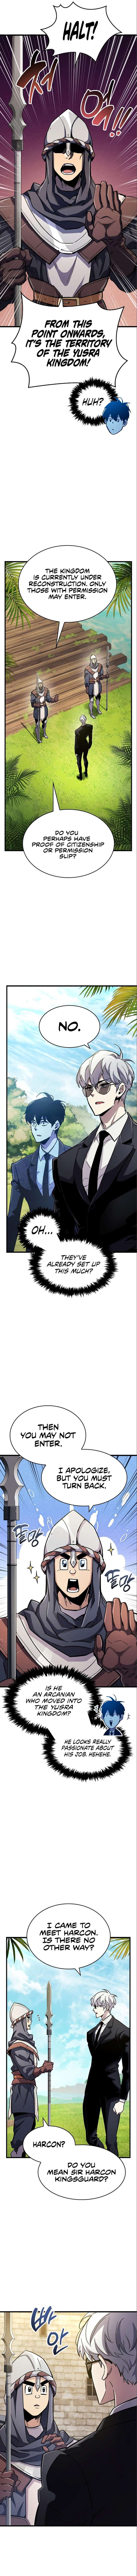 The Player Hides His Past Chapter 33 page 9